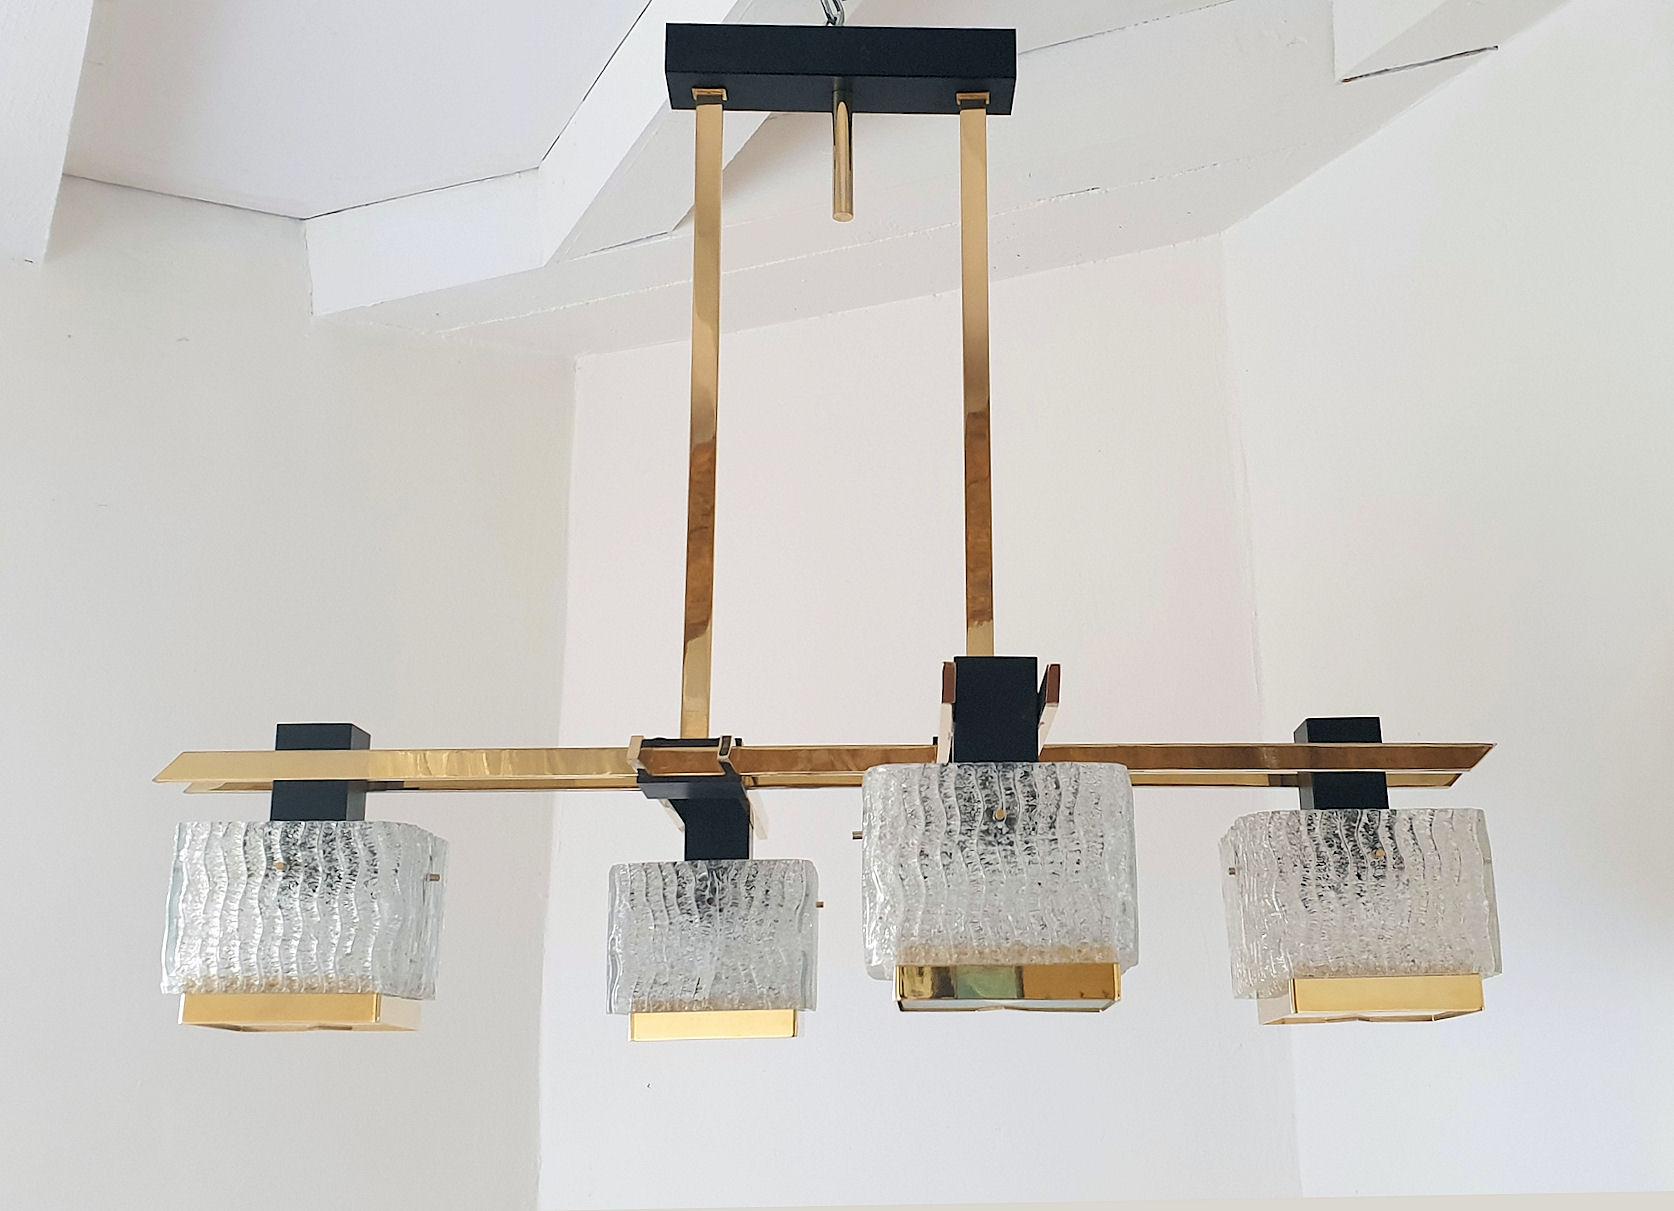 Geometric Mid-Century Modern chandelier, by Maison Arlus, France, 1960s.
Made of a quality brass frame, with black enamel metal elements and thick textured glass squares, nesting the light. 
The chandelier has 4 lights, and is rewired.
In good